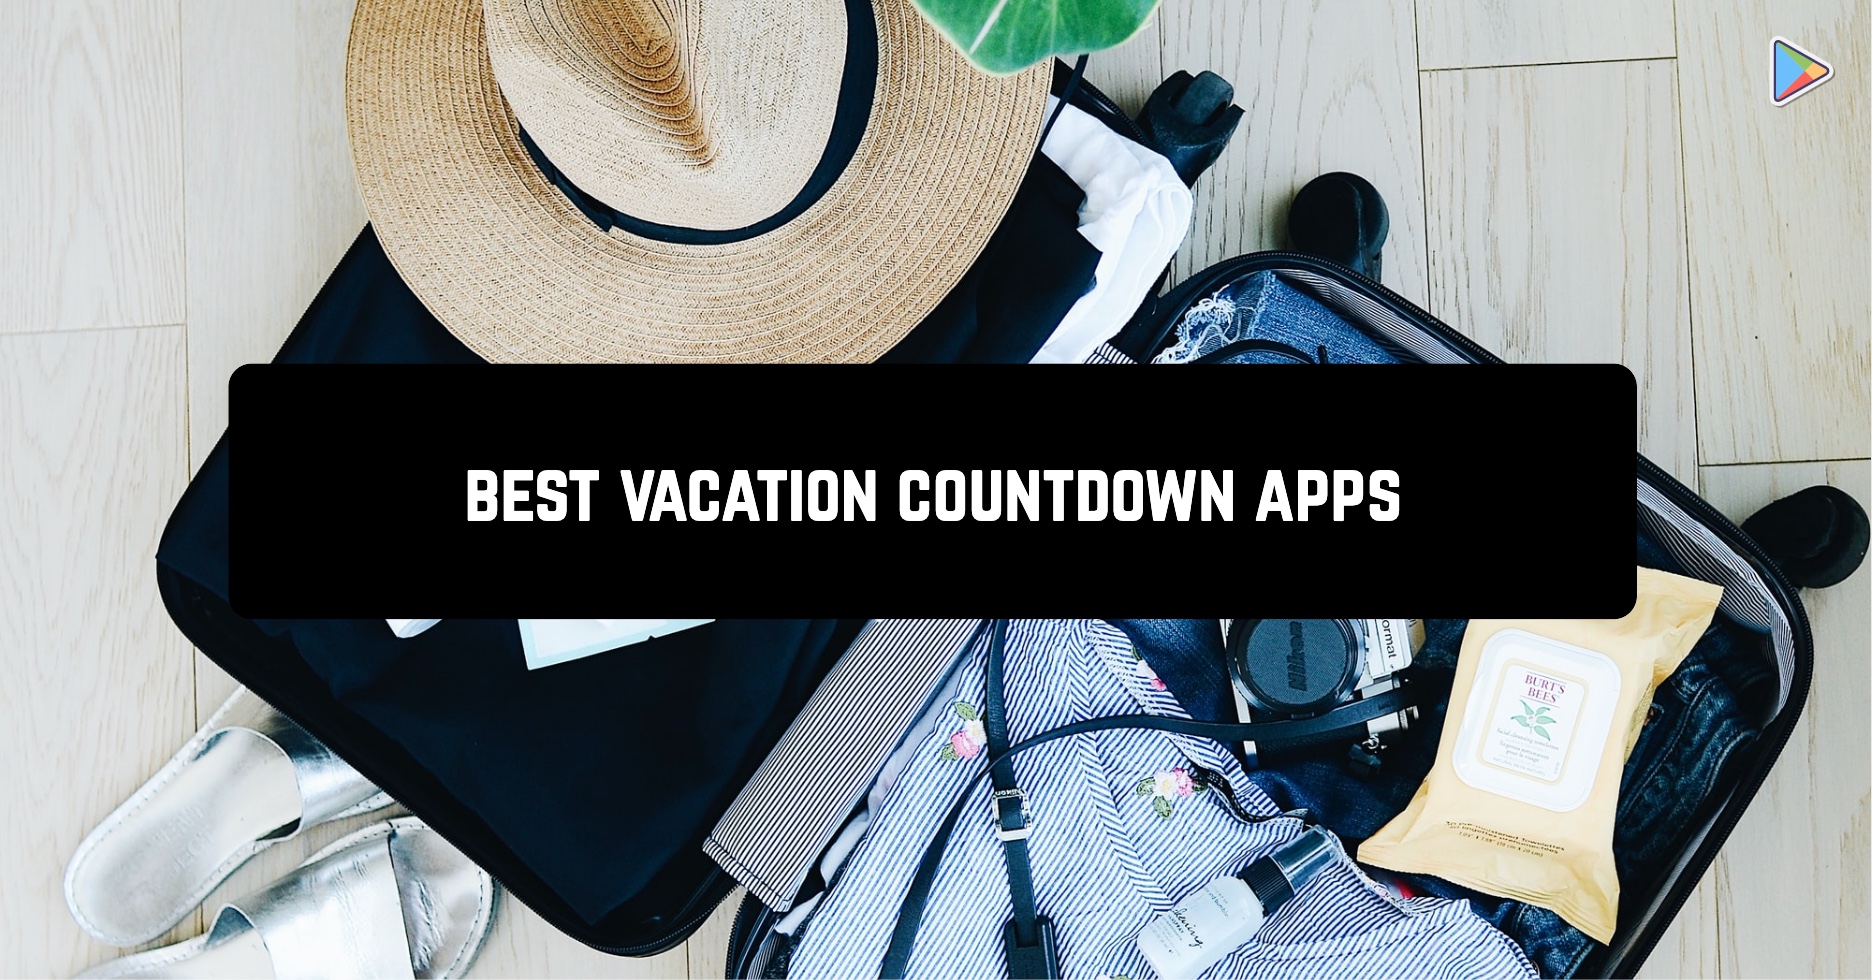 Best vacation countdown apps